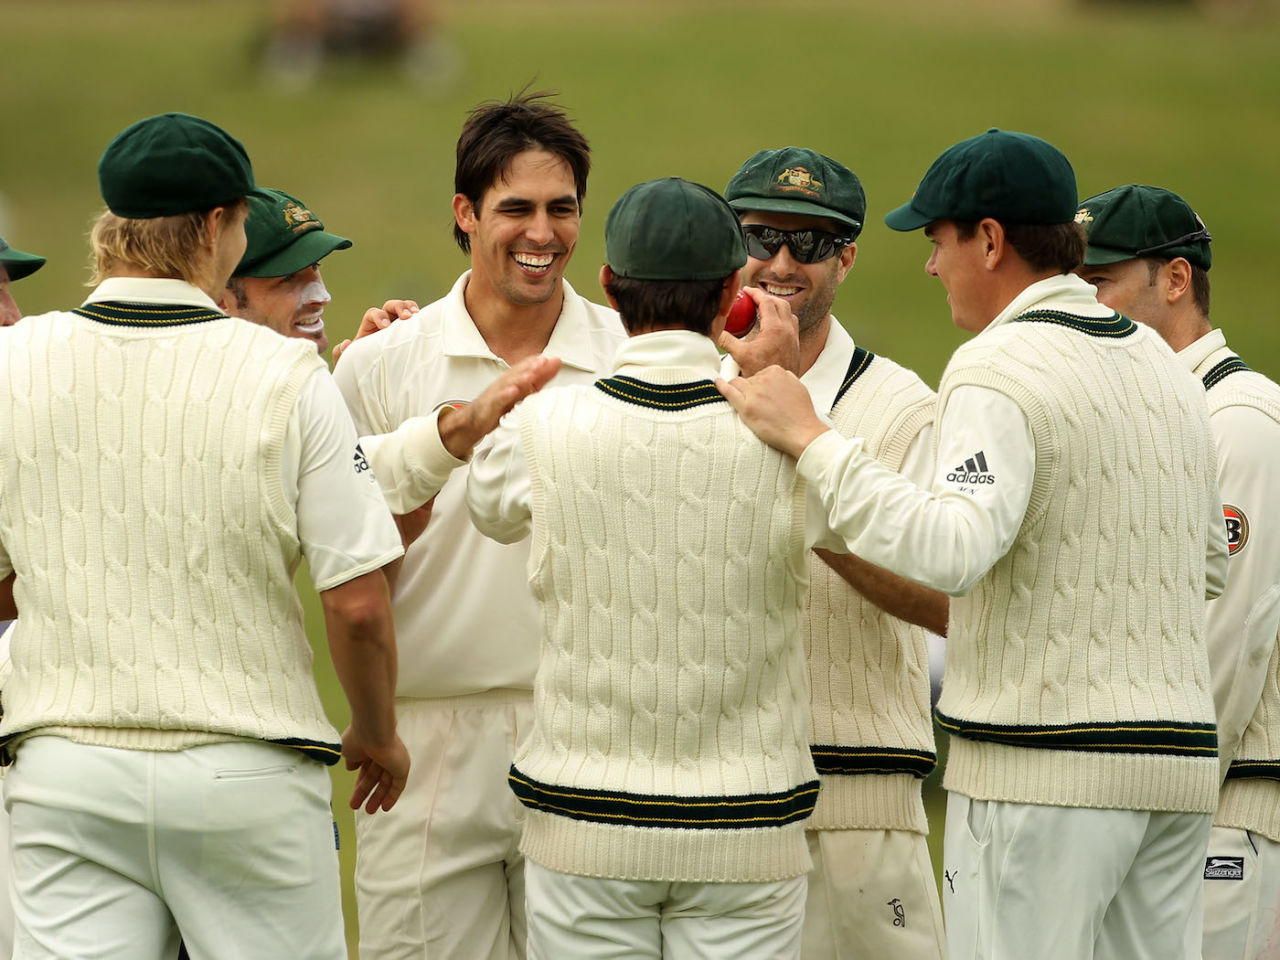 Mitchell Johnson accepts the praise on the way to 10 wickets for the match, New Zealand v Australia, 2nd Test, Hamilton, 5th day, March 31, 2010